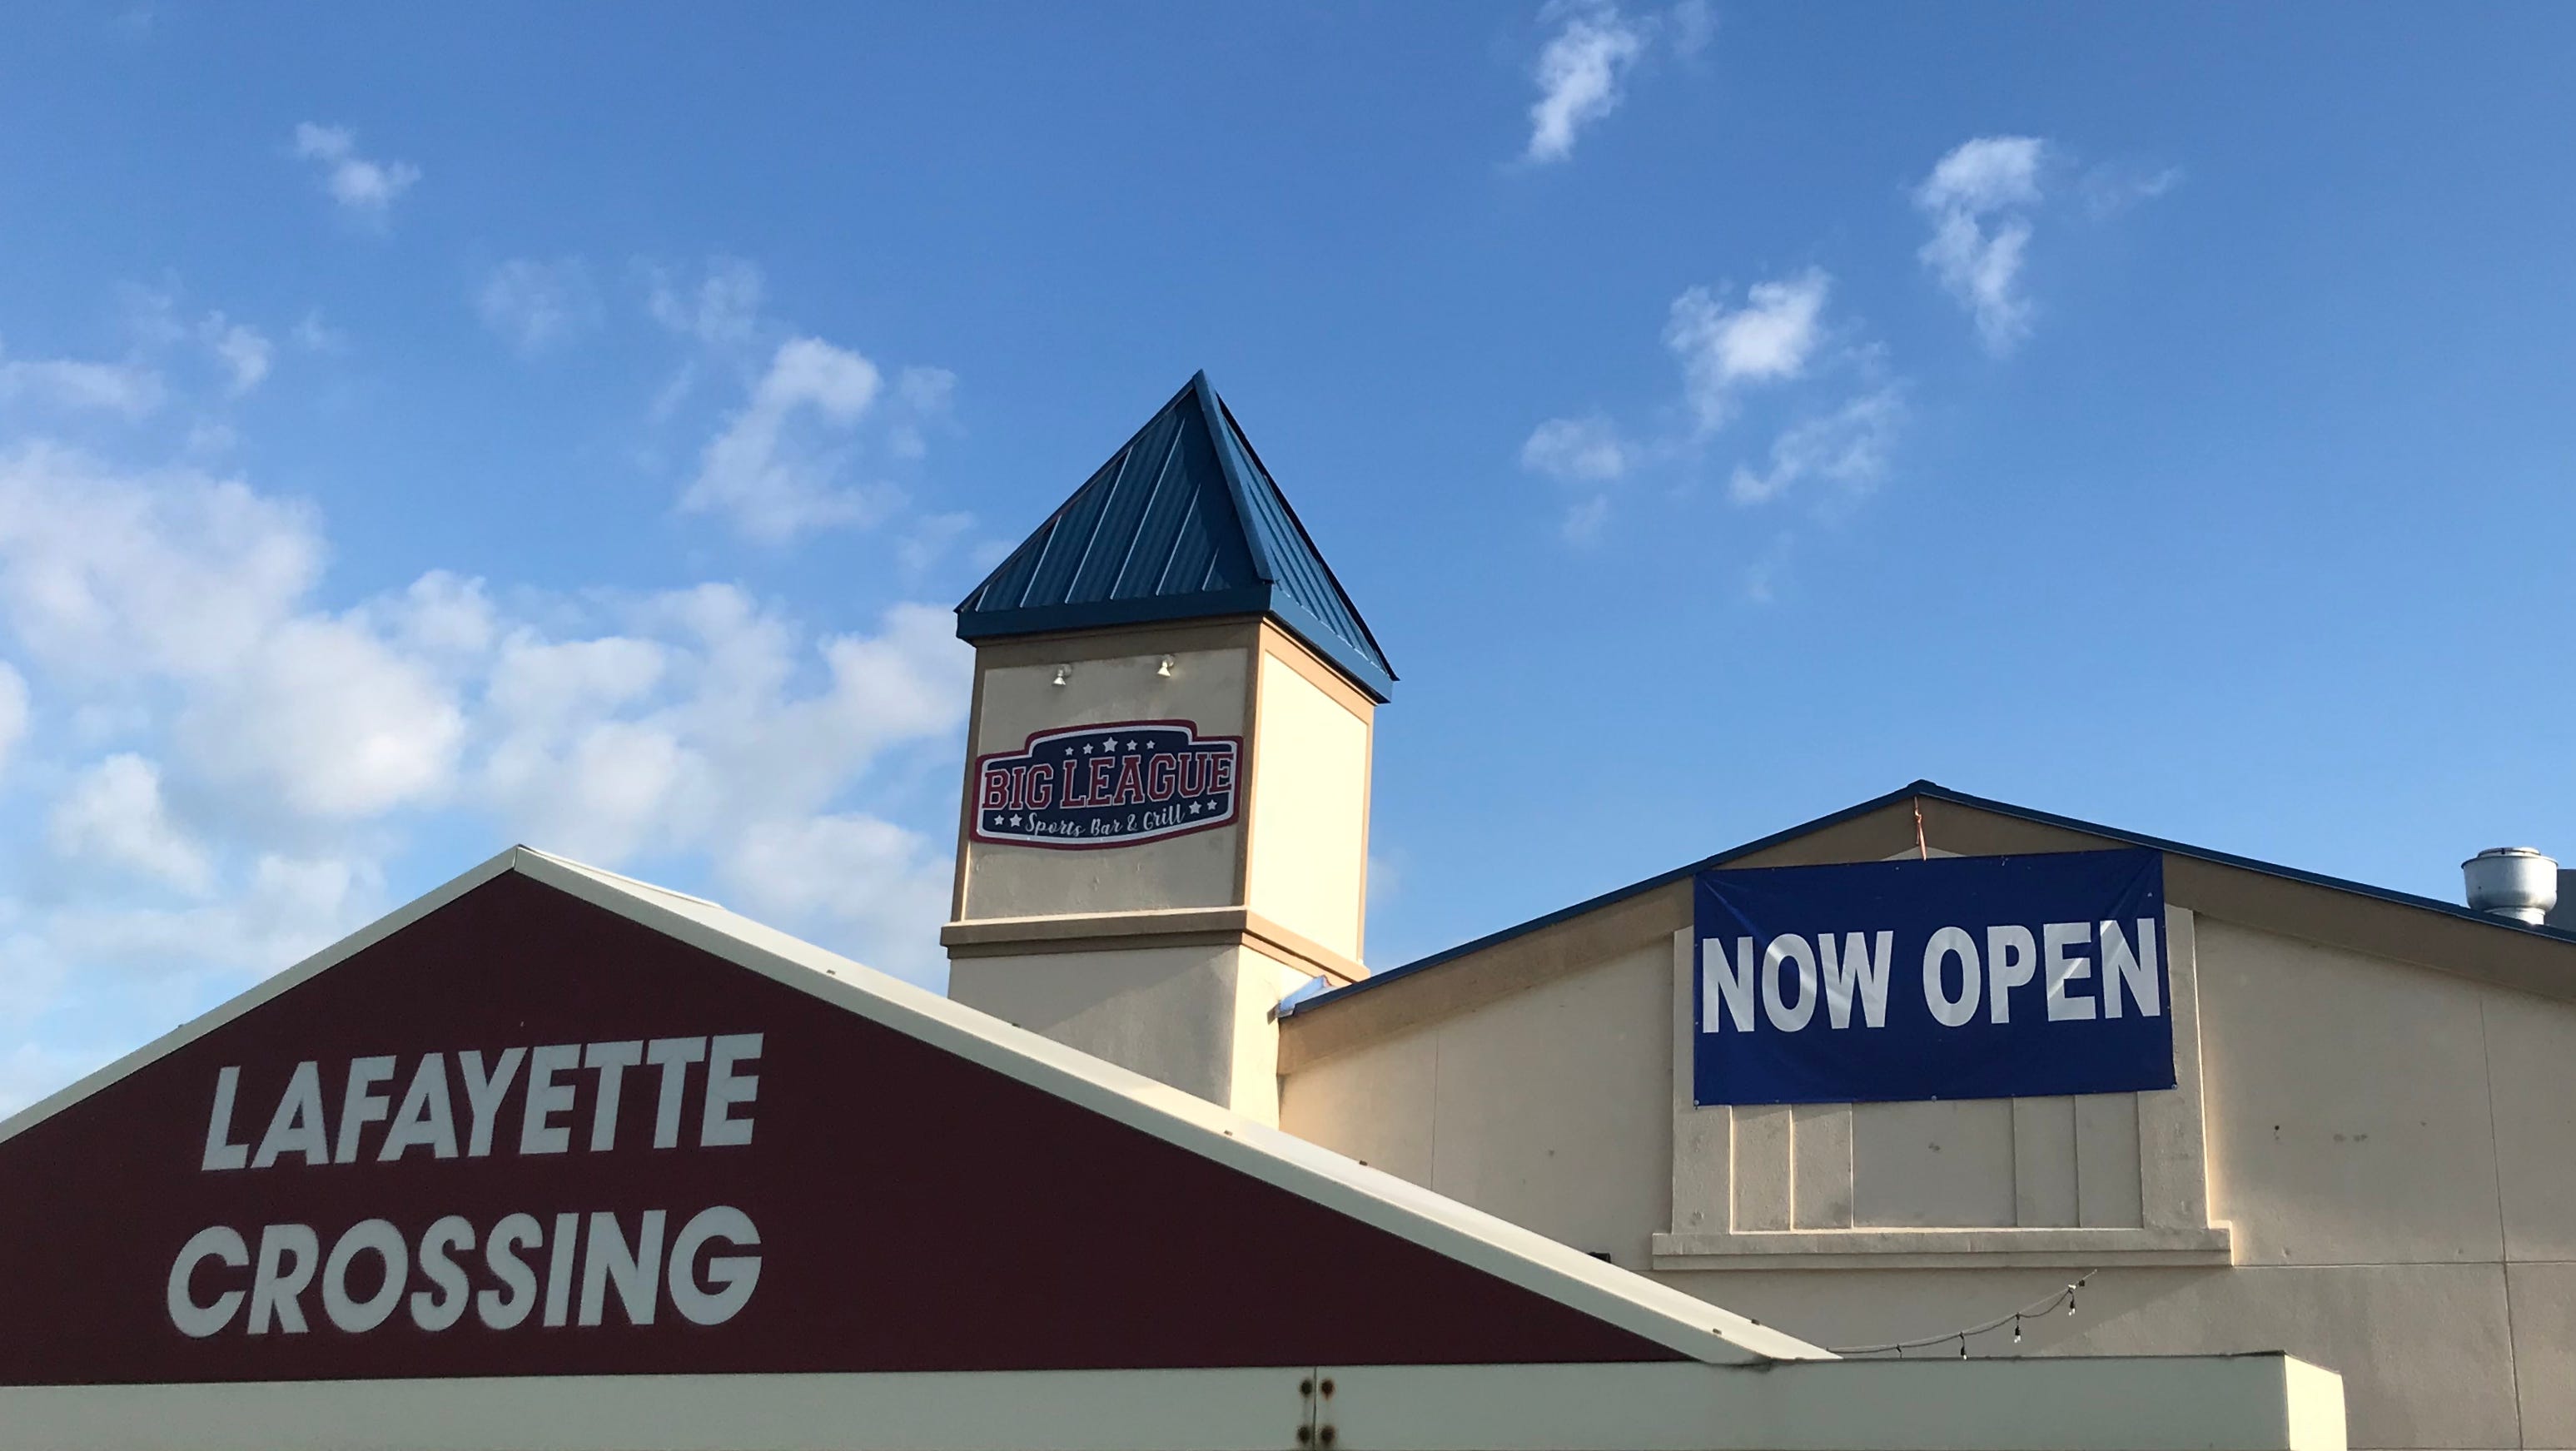 Lafayette police are investigating a homicide that happened late Aug. 15, 2020, in the parking lot of Big League Sports Bar & Grill in the Lafayette Crossing strip mall on Frontage Road.